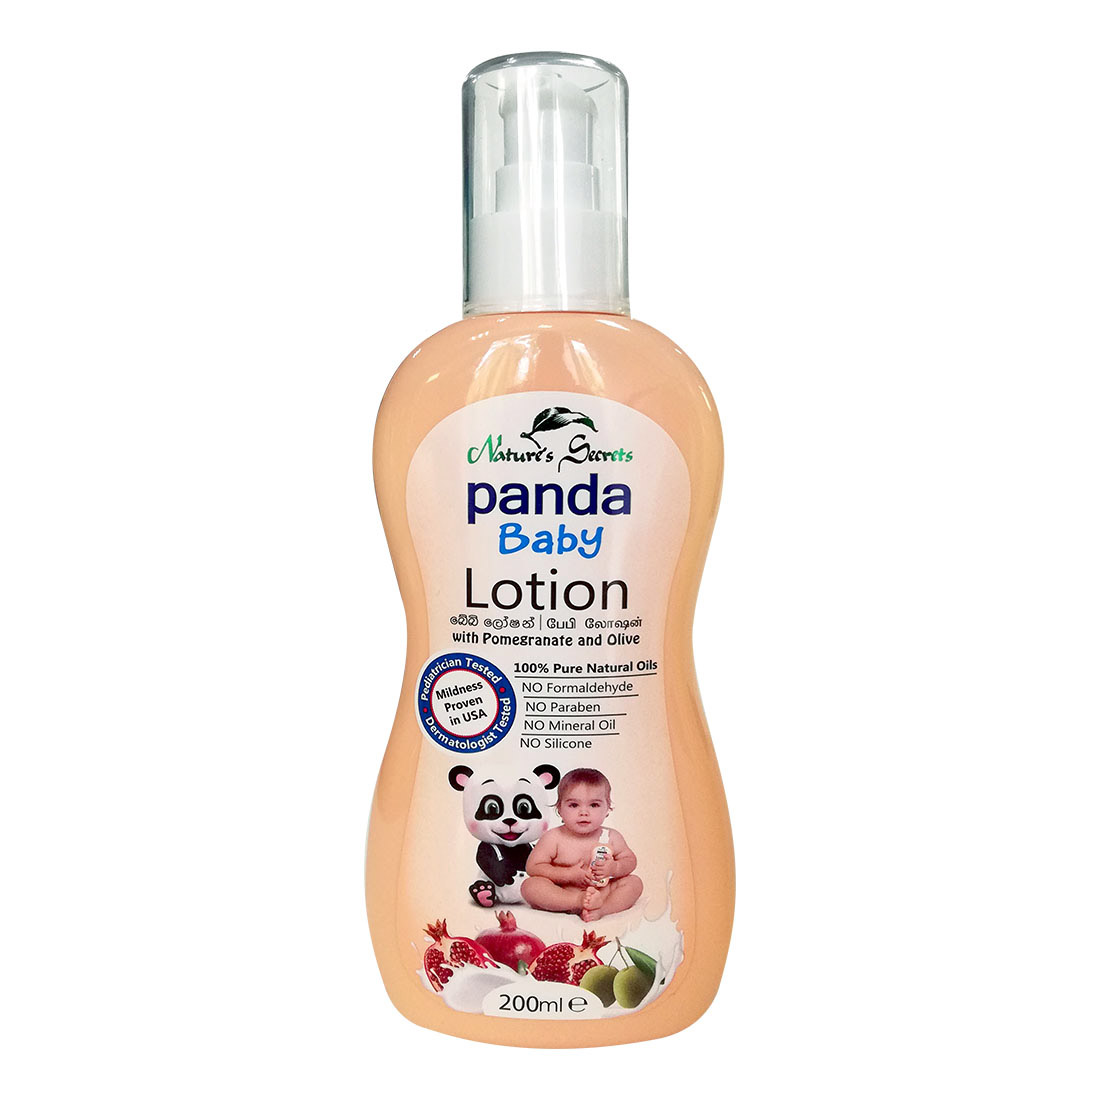 Panda Baby Lotion with Pomegranate & Olive - 200ml